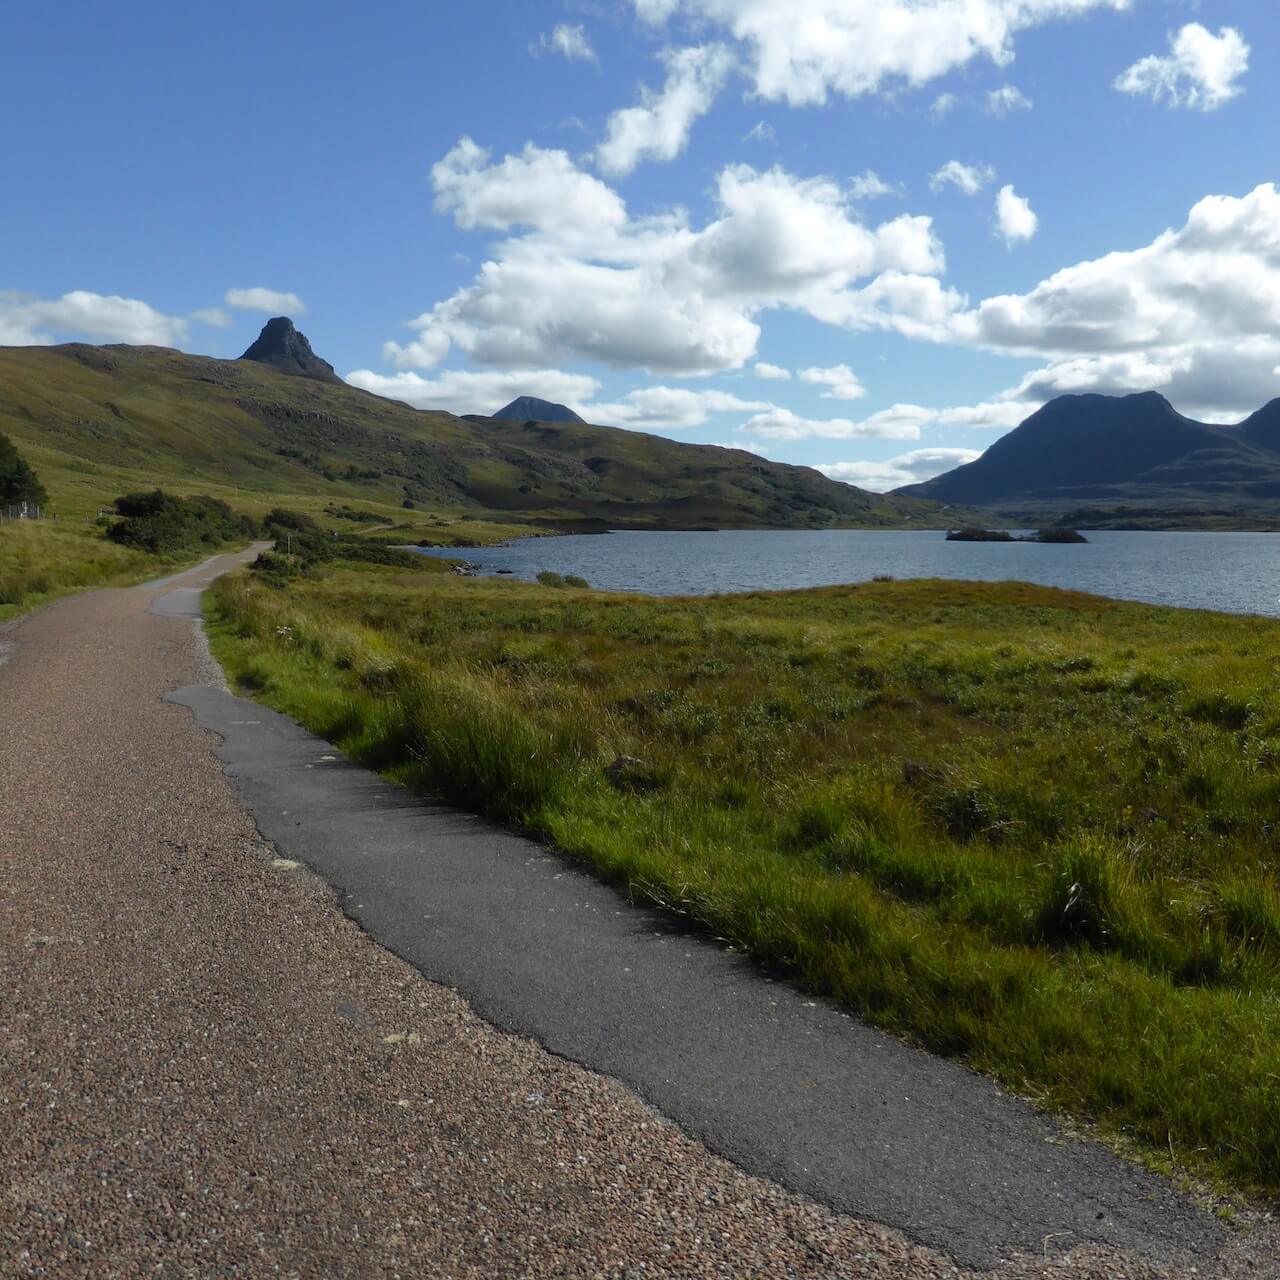 Single track road with Stac Pollaidh in the background